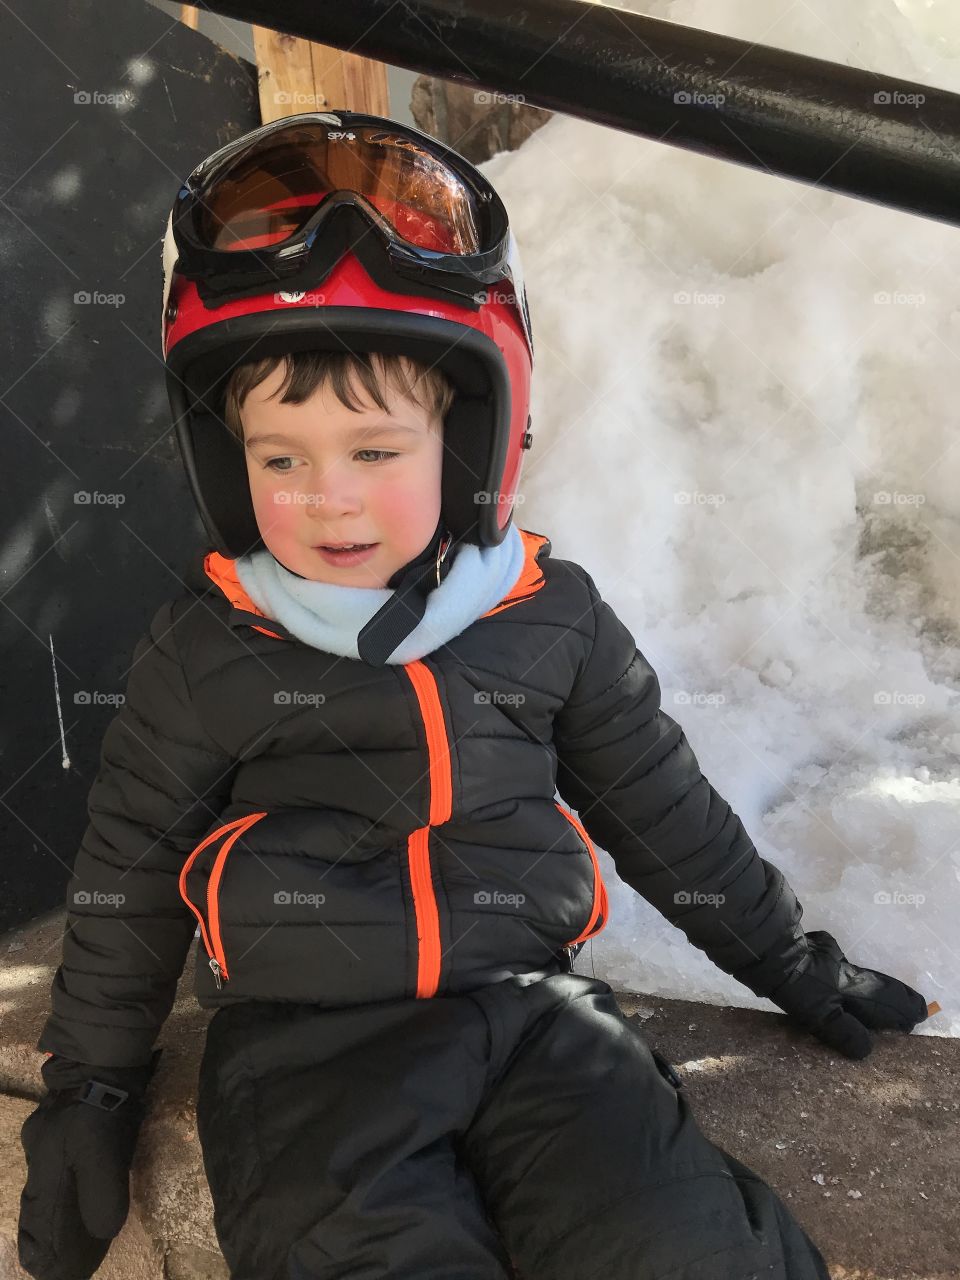 Boy with ski goggles and helmet